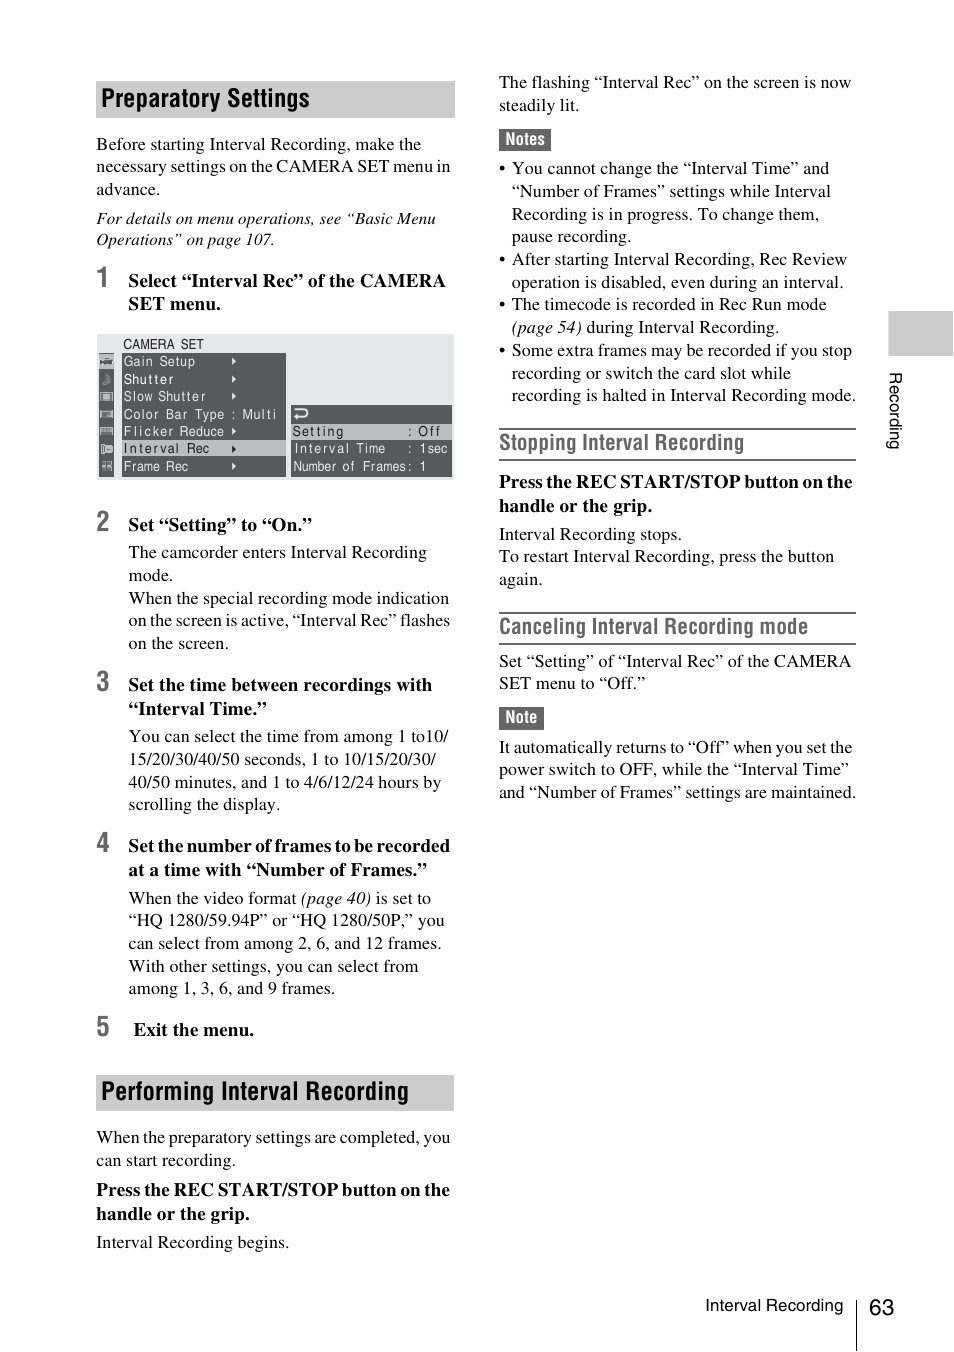 Preparatory settings, Performing interval recording, Preparatory settings performing interval recording | Stopping interval recording, Canceling interval recording mode | Sony PMW-F3K User Manual | Page 63 / 164